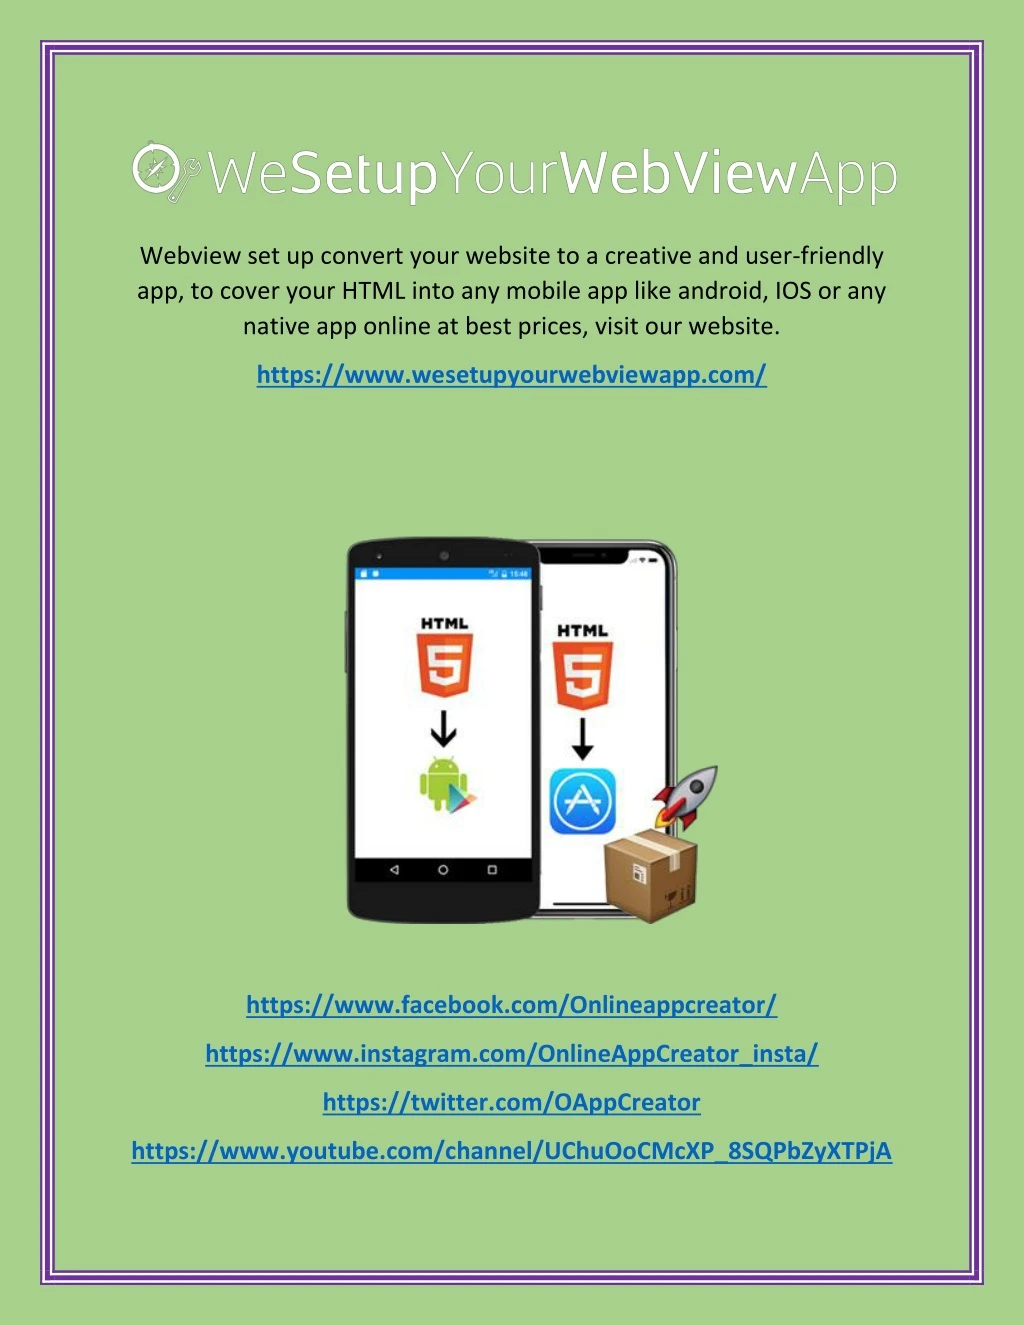 webview set up convert your website to a creative